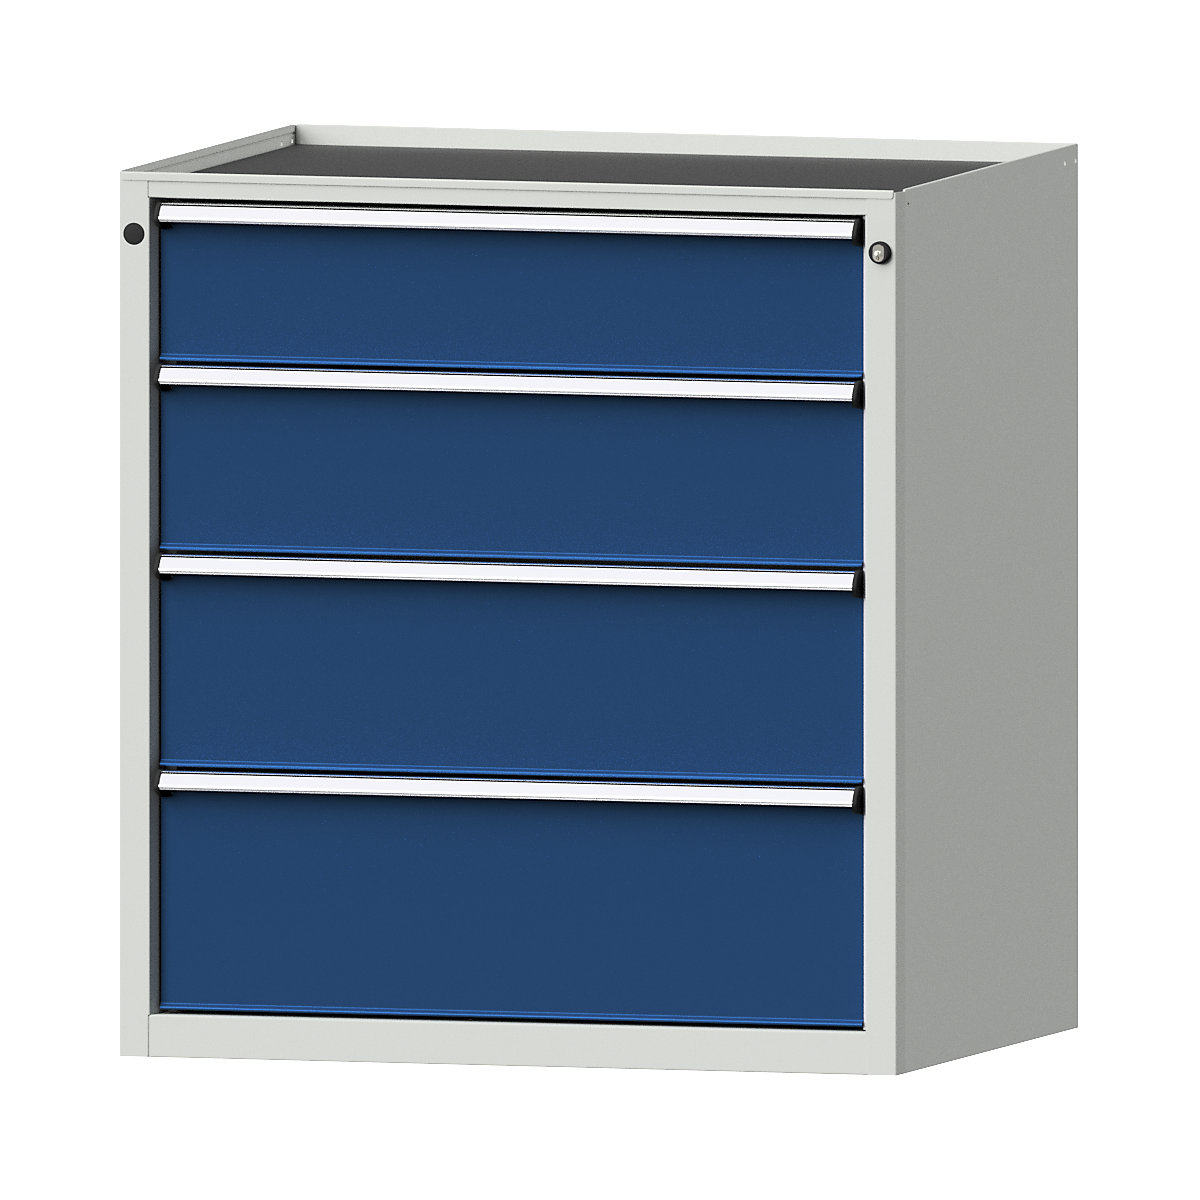 Drawer cupboard – ANKE, WxD 910 x 675 mm, 4 drawers, height 980 mm, front in gentian blue-13